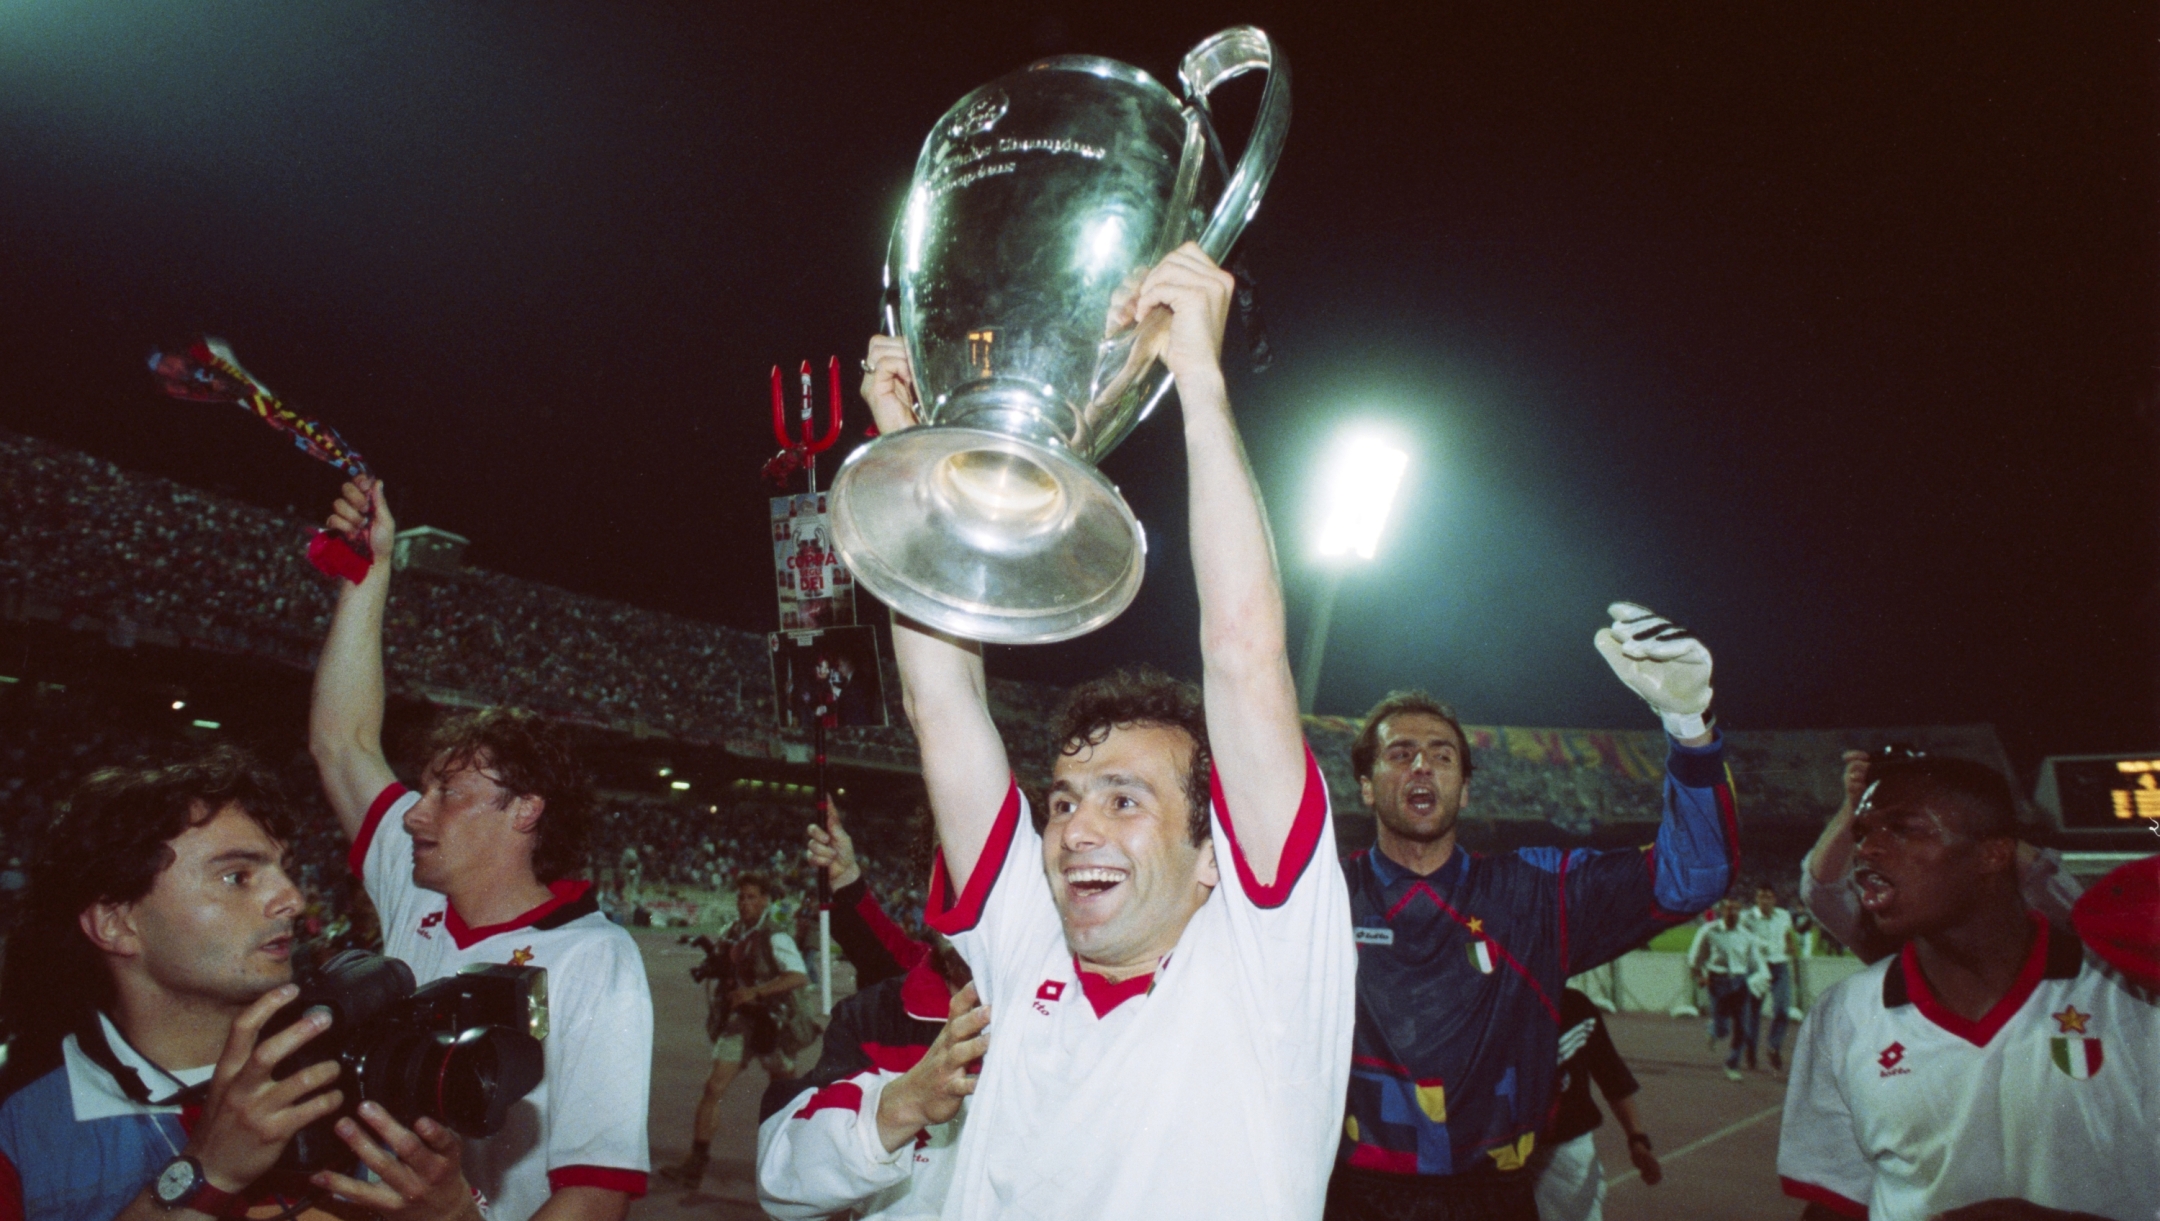 ATHENS, GREECE - MAY 18: AC Milan player Dejan Savicevic holds aloft the trophy after the 1994 UEFA European Cup Final victory against Barcelona on May 18th, 1994 in Athens, Greece. (Photo by Shaun Botterill/Allsport/Getty Images/Hulton Archive)